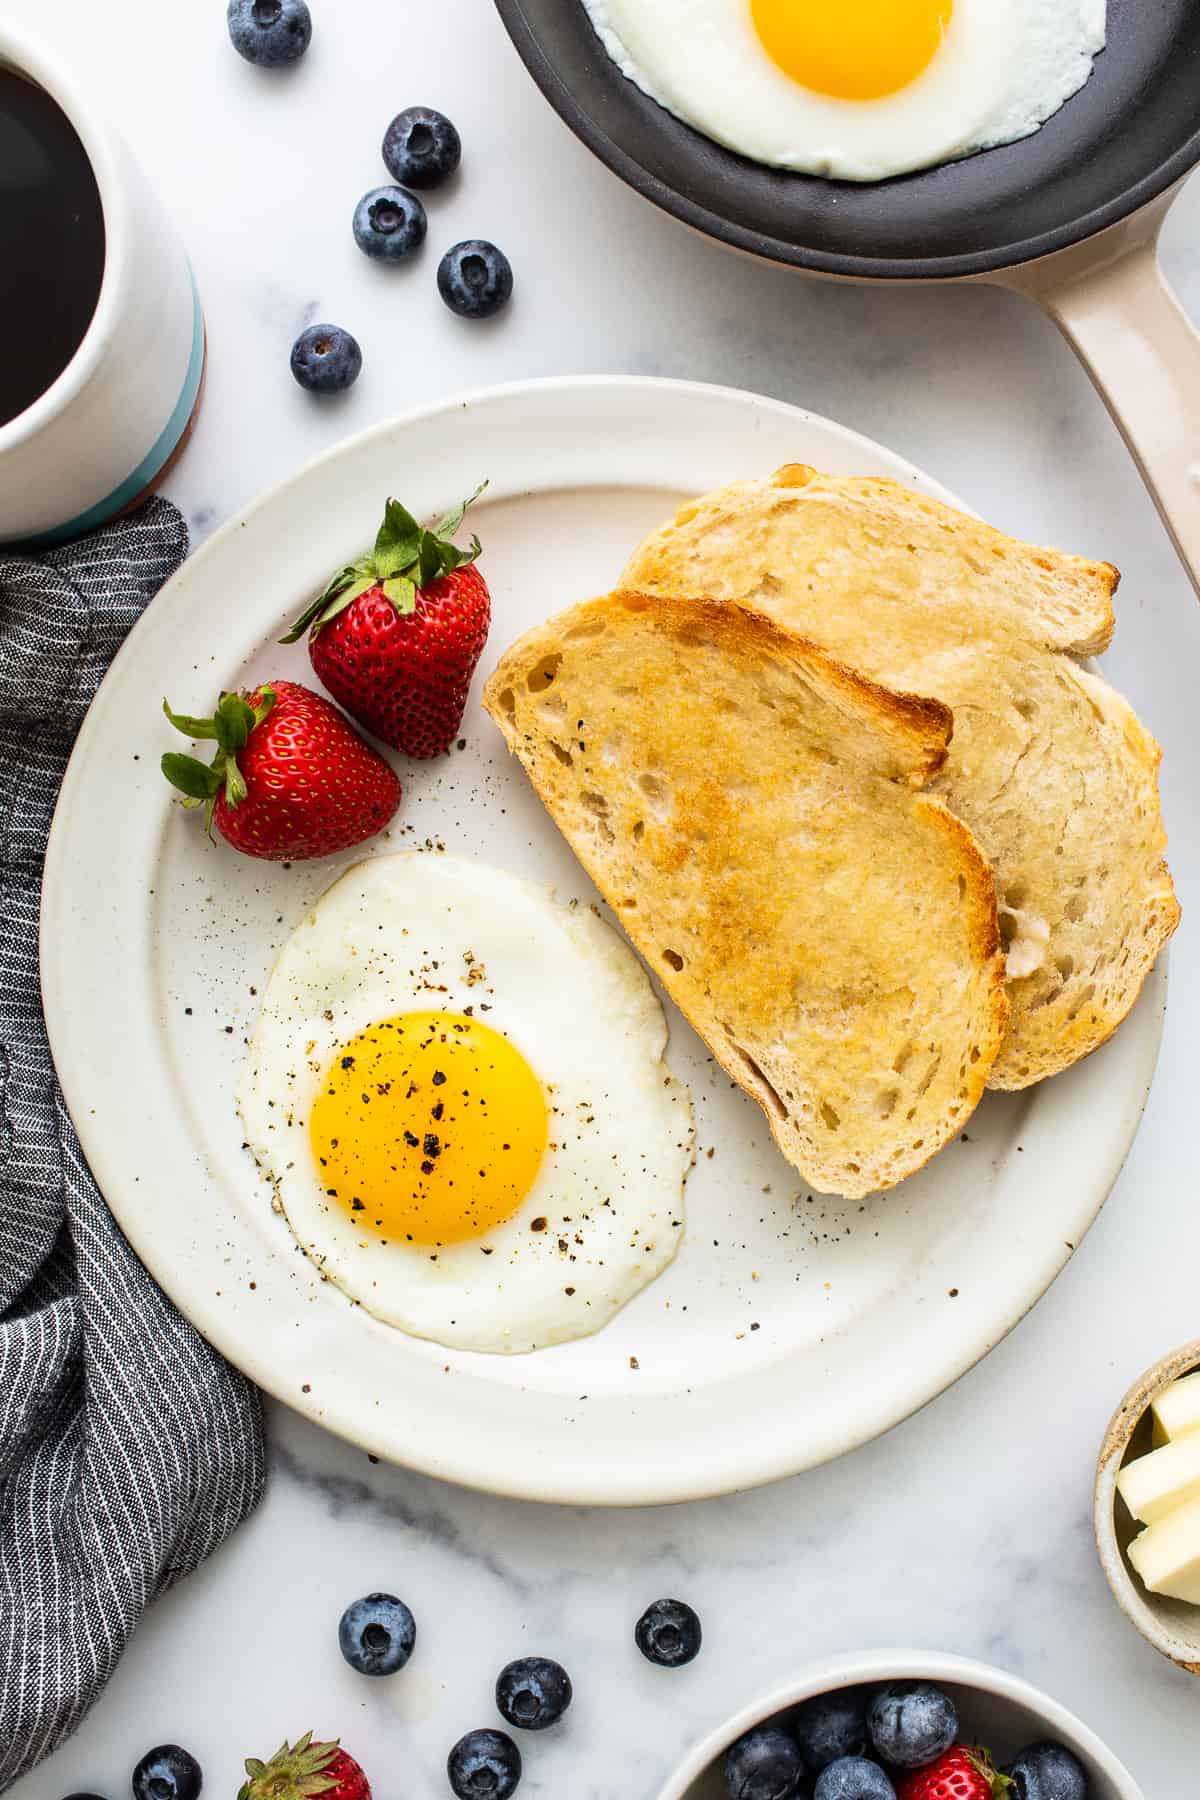 A sunny side up egg on a plate with salt and pepper.